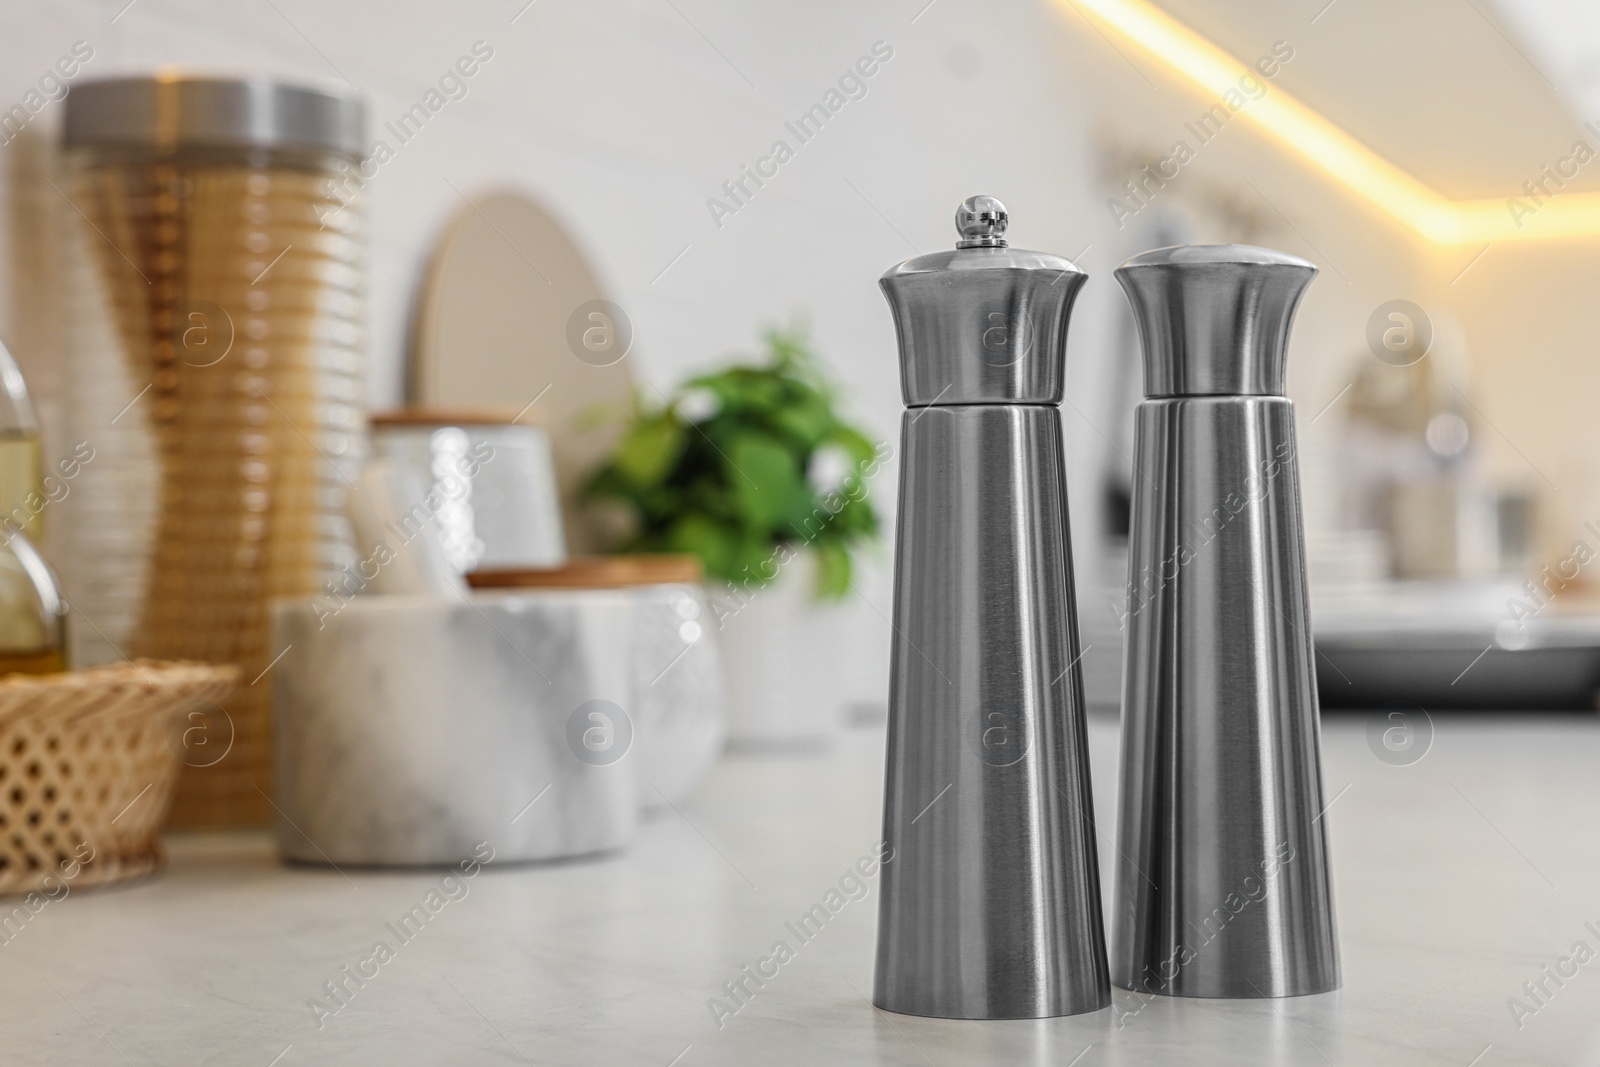 Photo of Stainless steel salt and pepper shakers on table, space for text